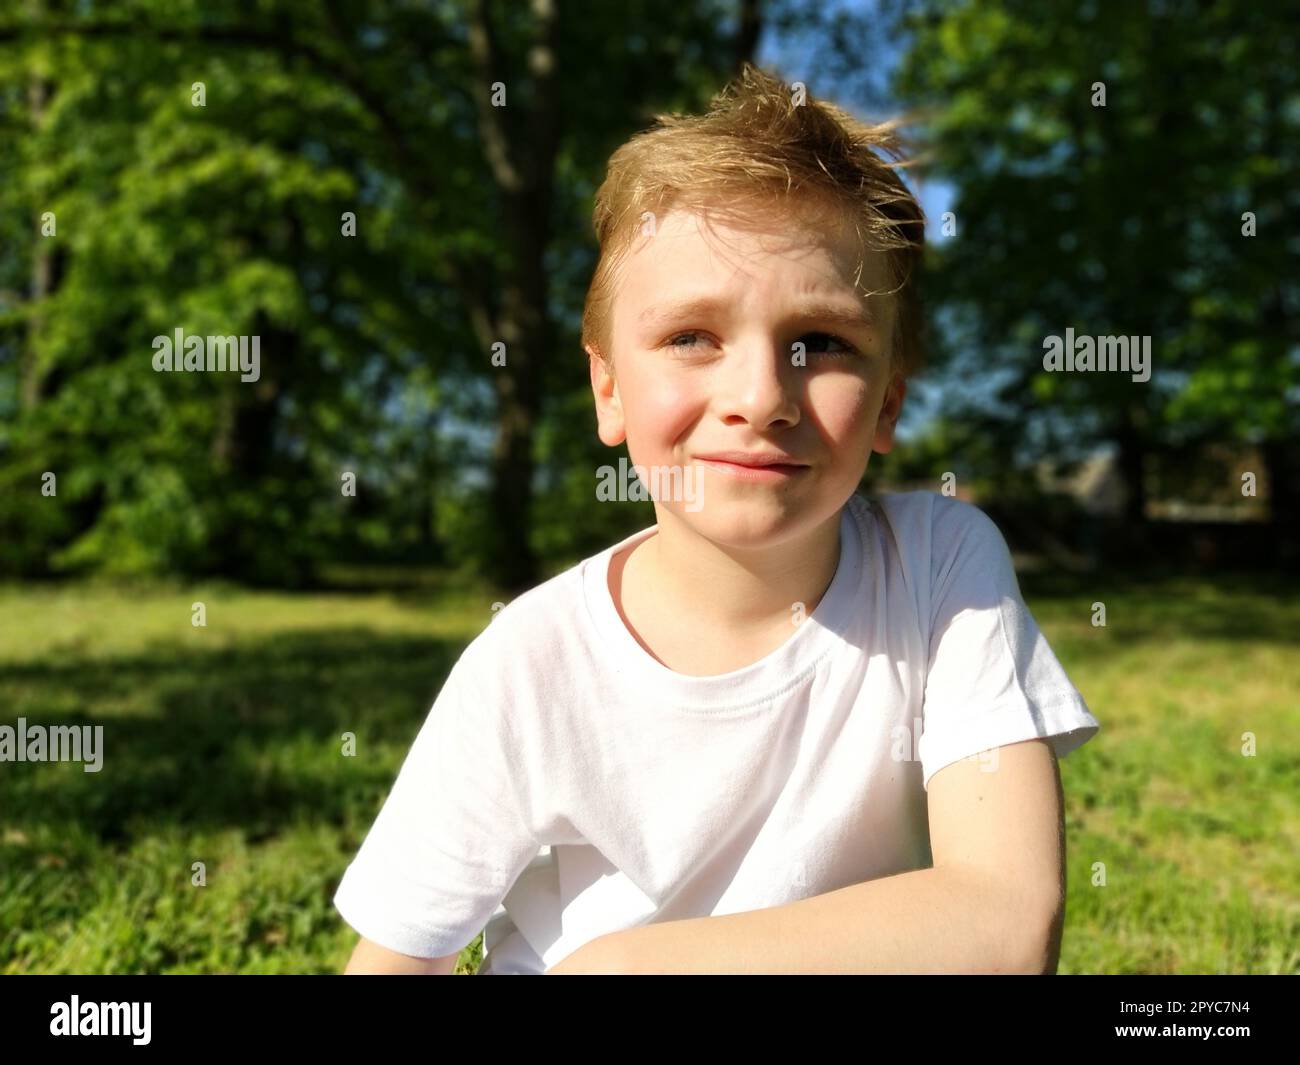 A cute young boy smiling and looks to the side. The child is dressed in a white T-shirt and blue pants. Blond hair is beautiful fall on the forehead. Long blonde eyelashes. Park in the background Stock Photo